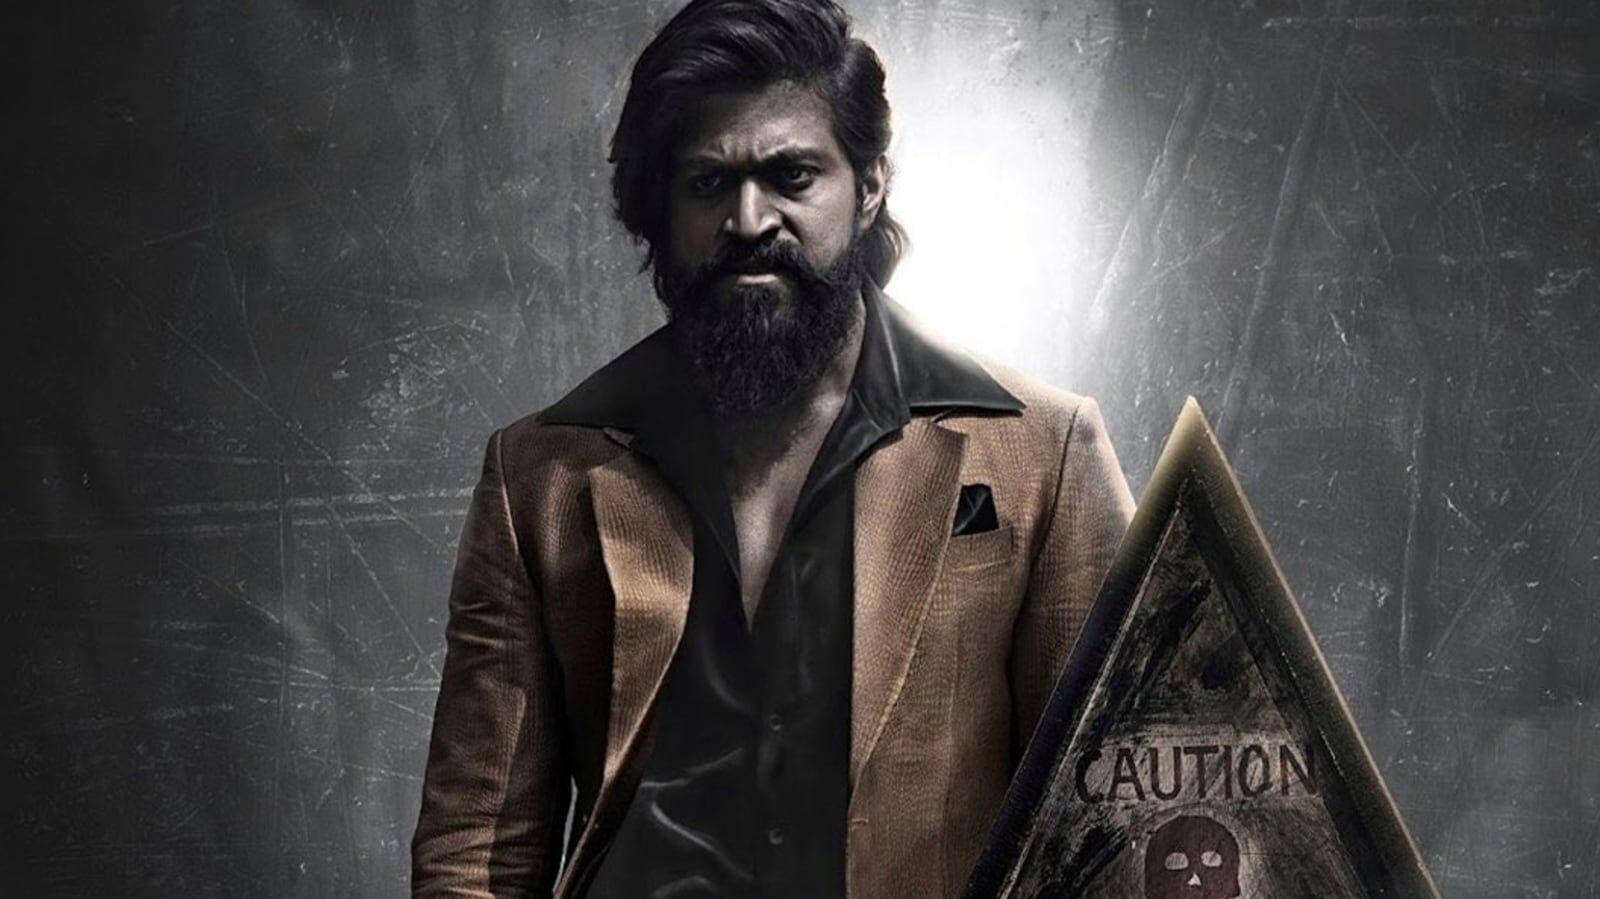 Kgf Box Office Yash S Film Stood 7th Among Highest Grossing